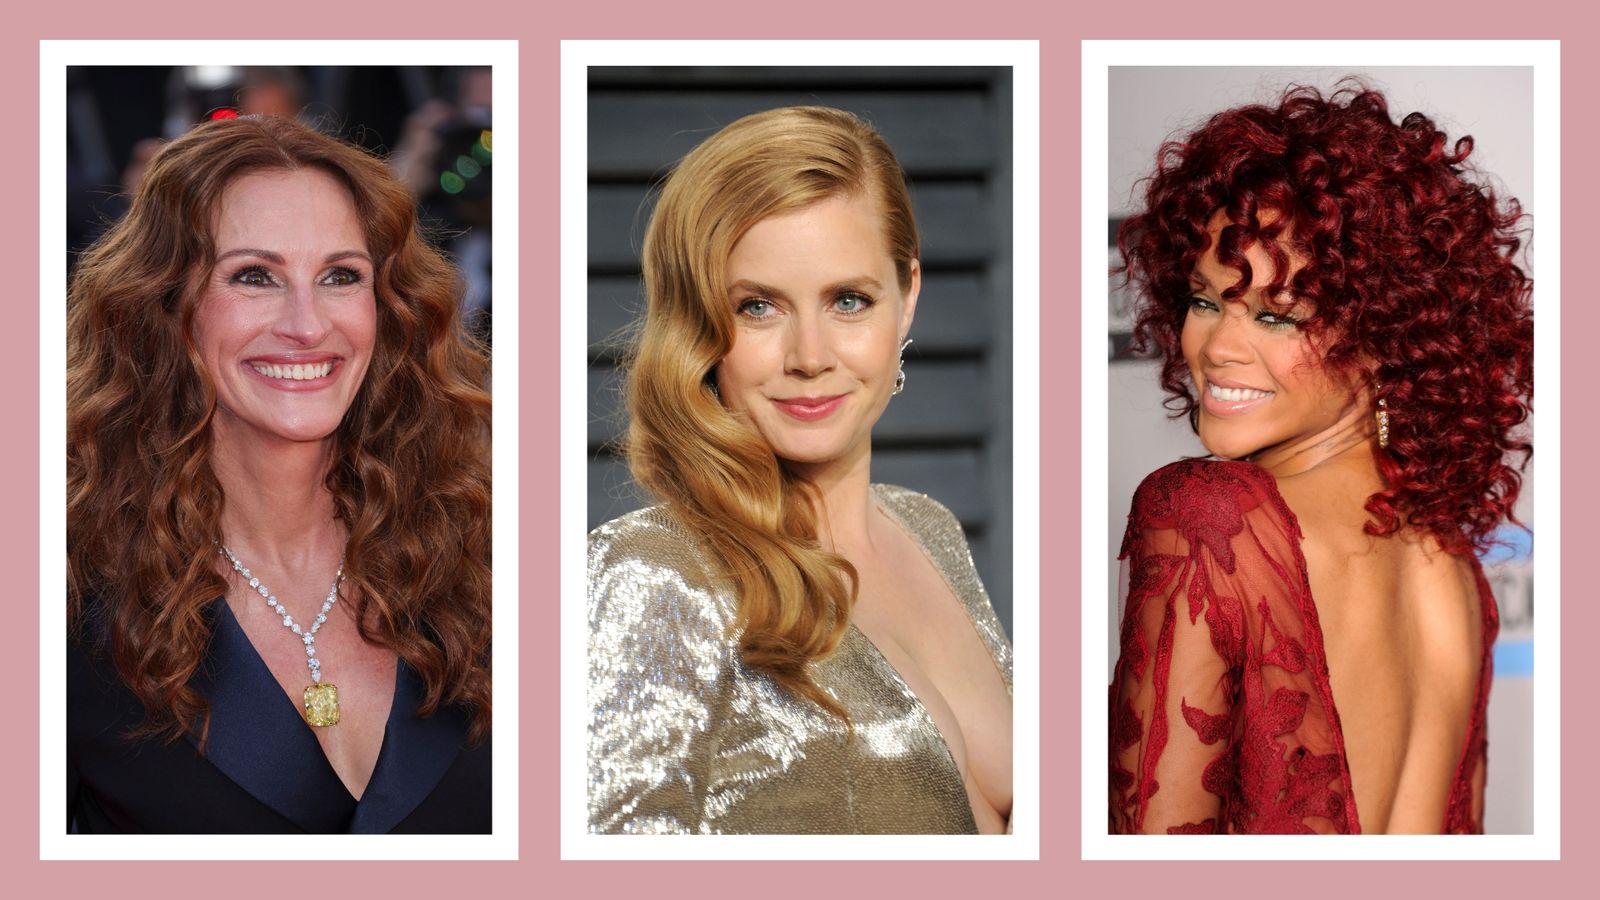 32 red hair ideas to take to your next salon appointment | Woman & Home